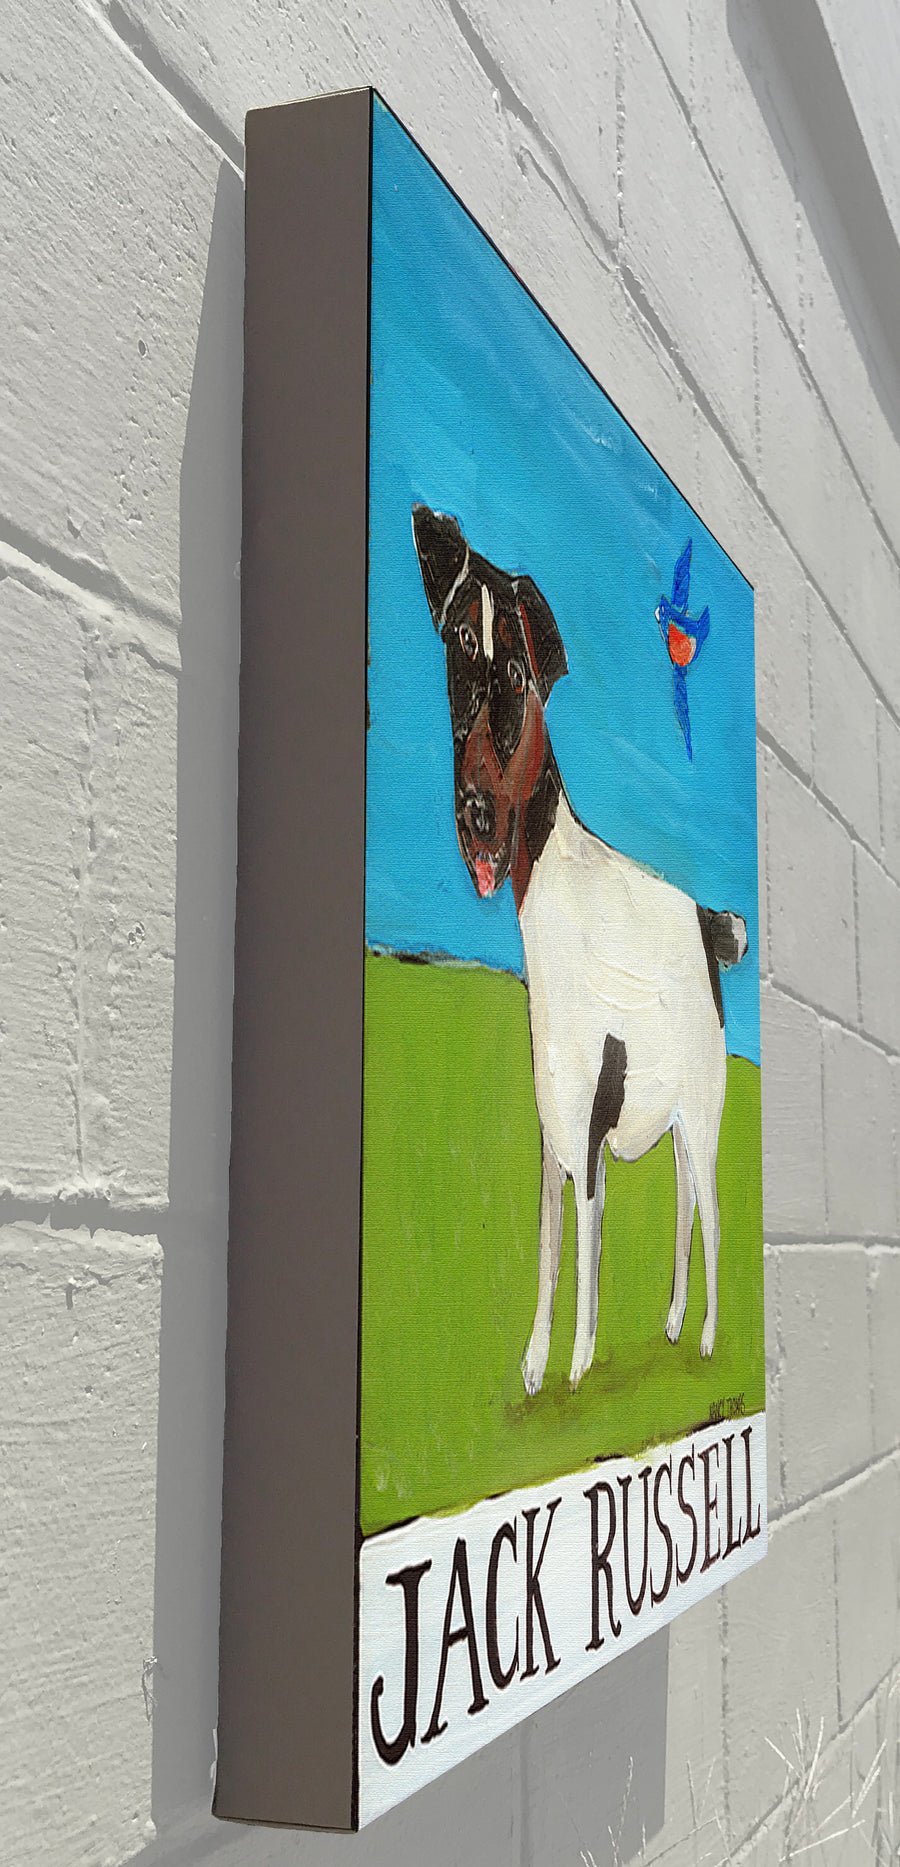 Gallery Grand - Doggie - Jack Russell